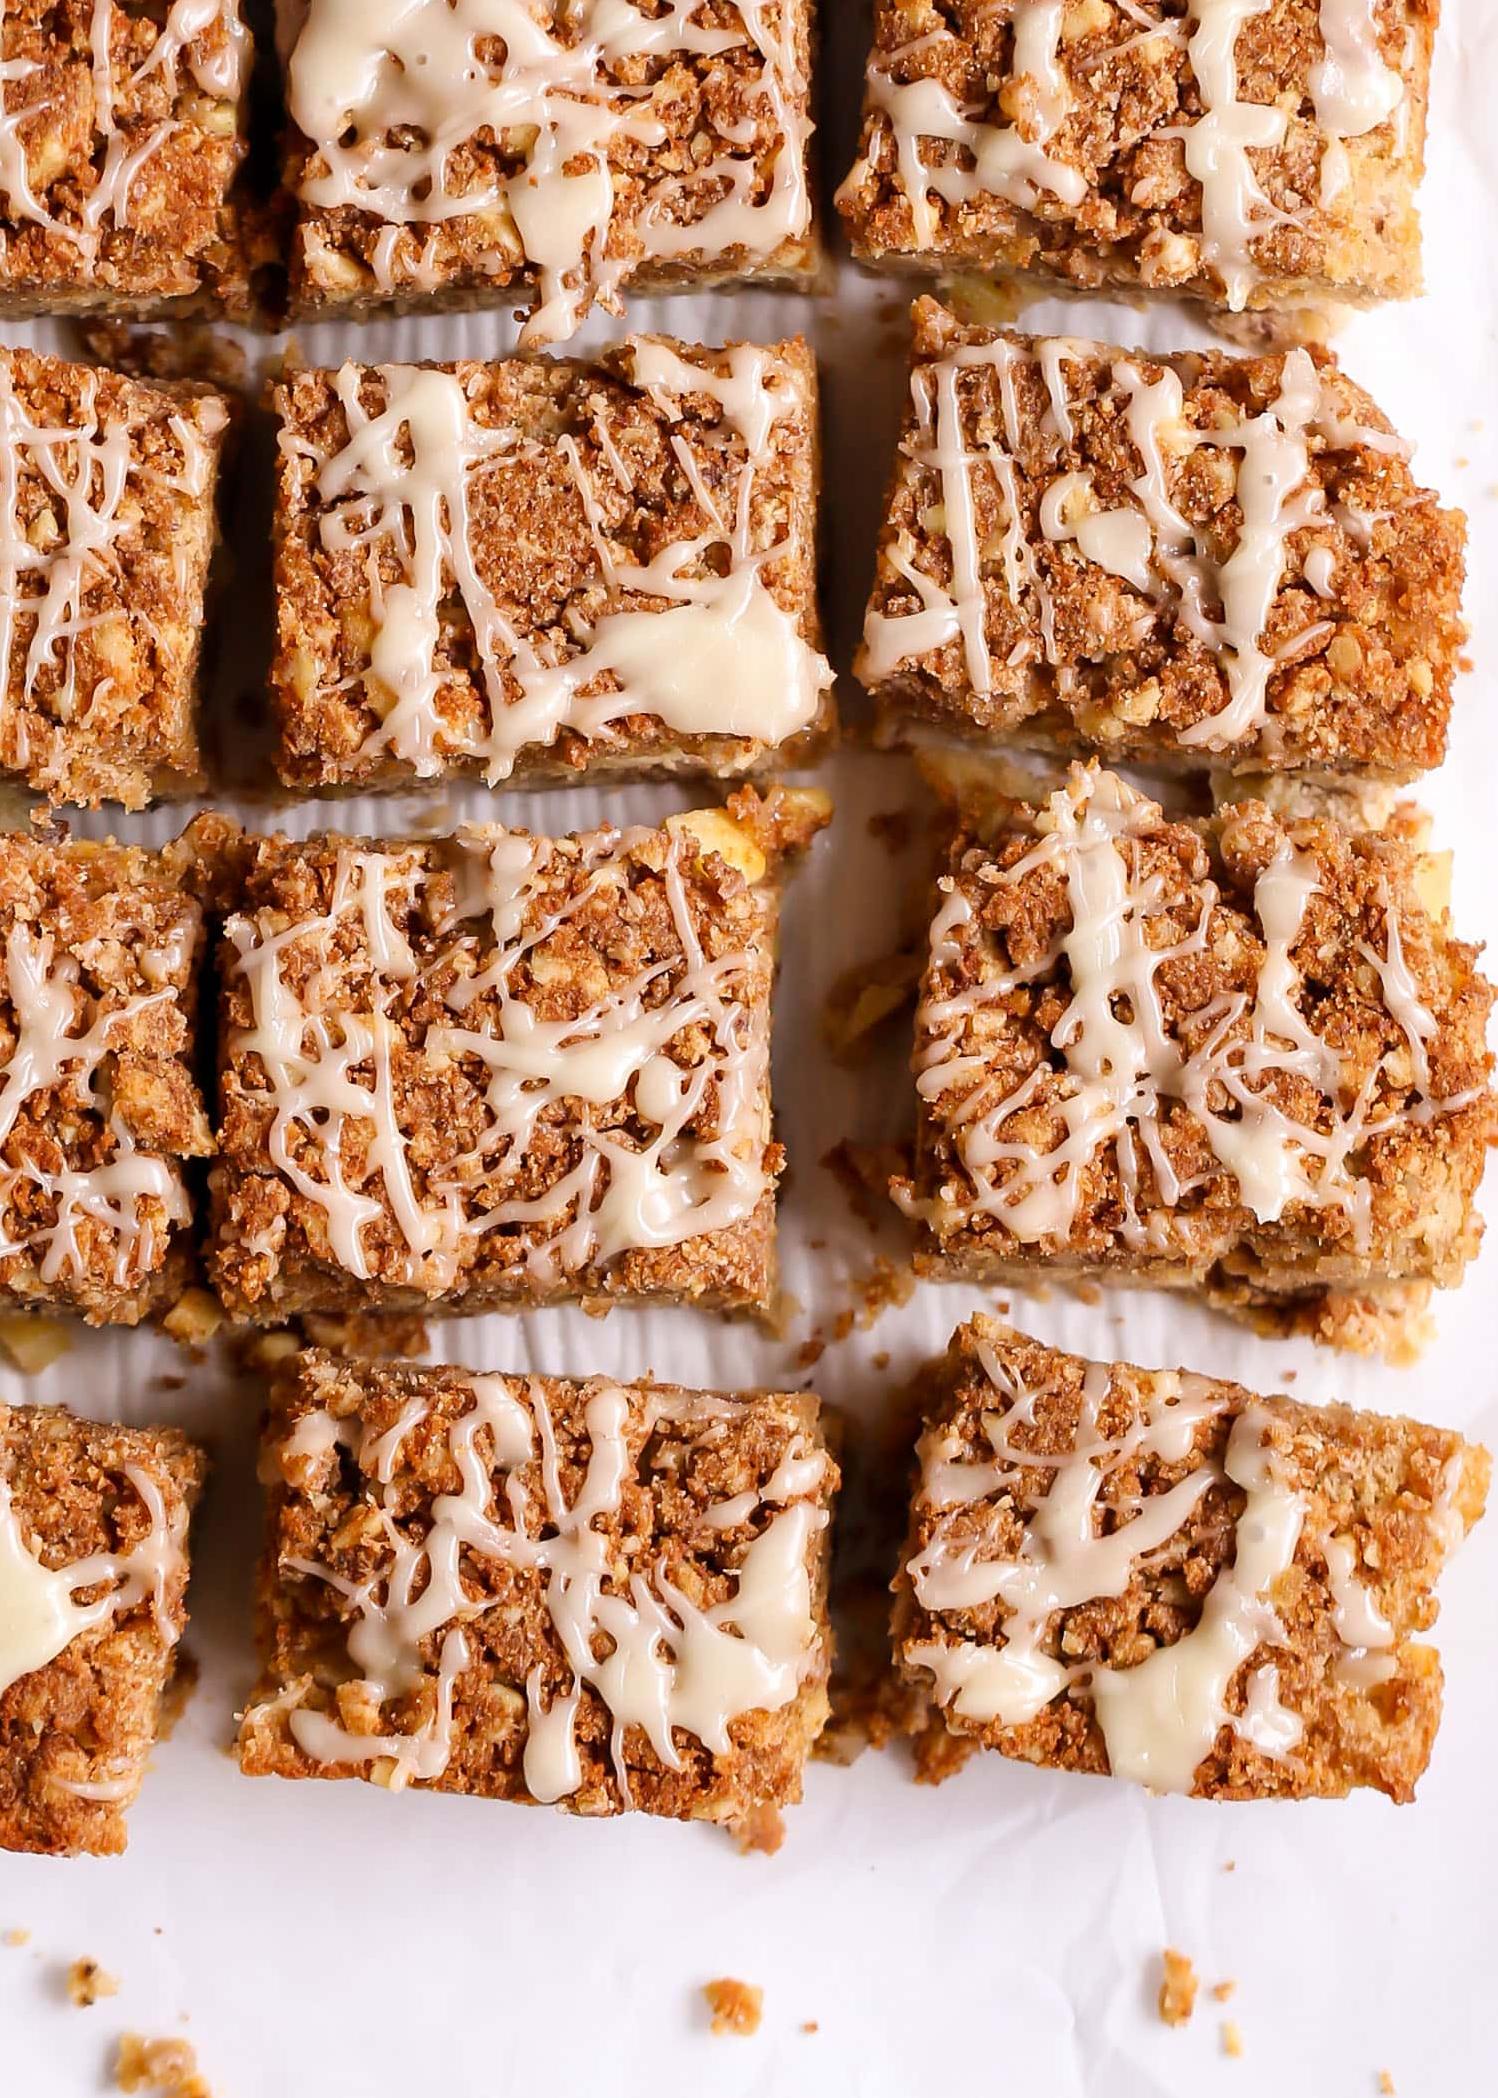  Warm up your day with this scrumptious apple walnut coffee cake.